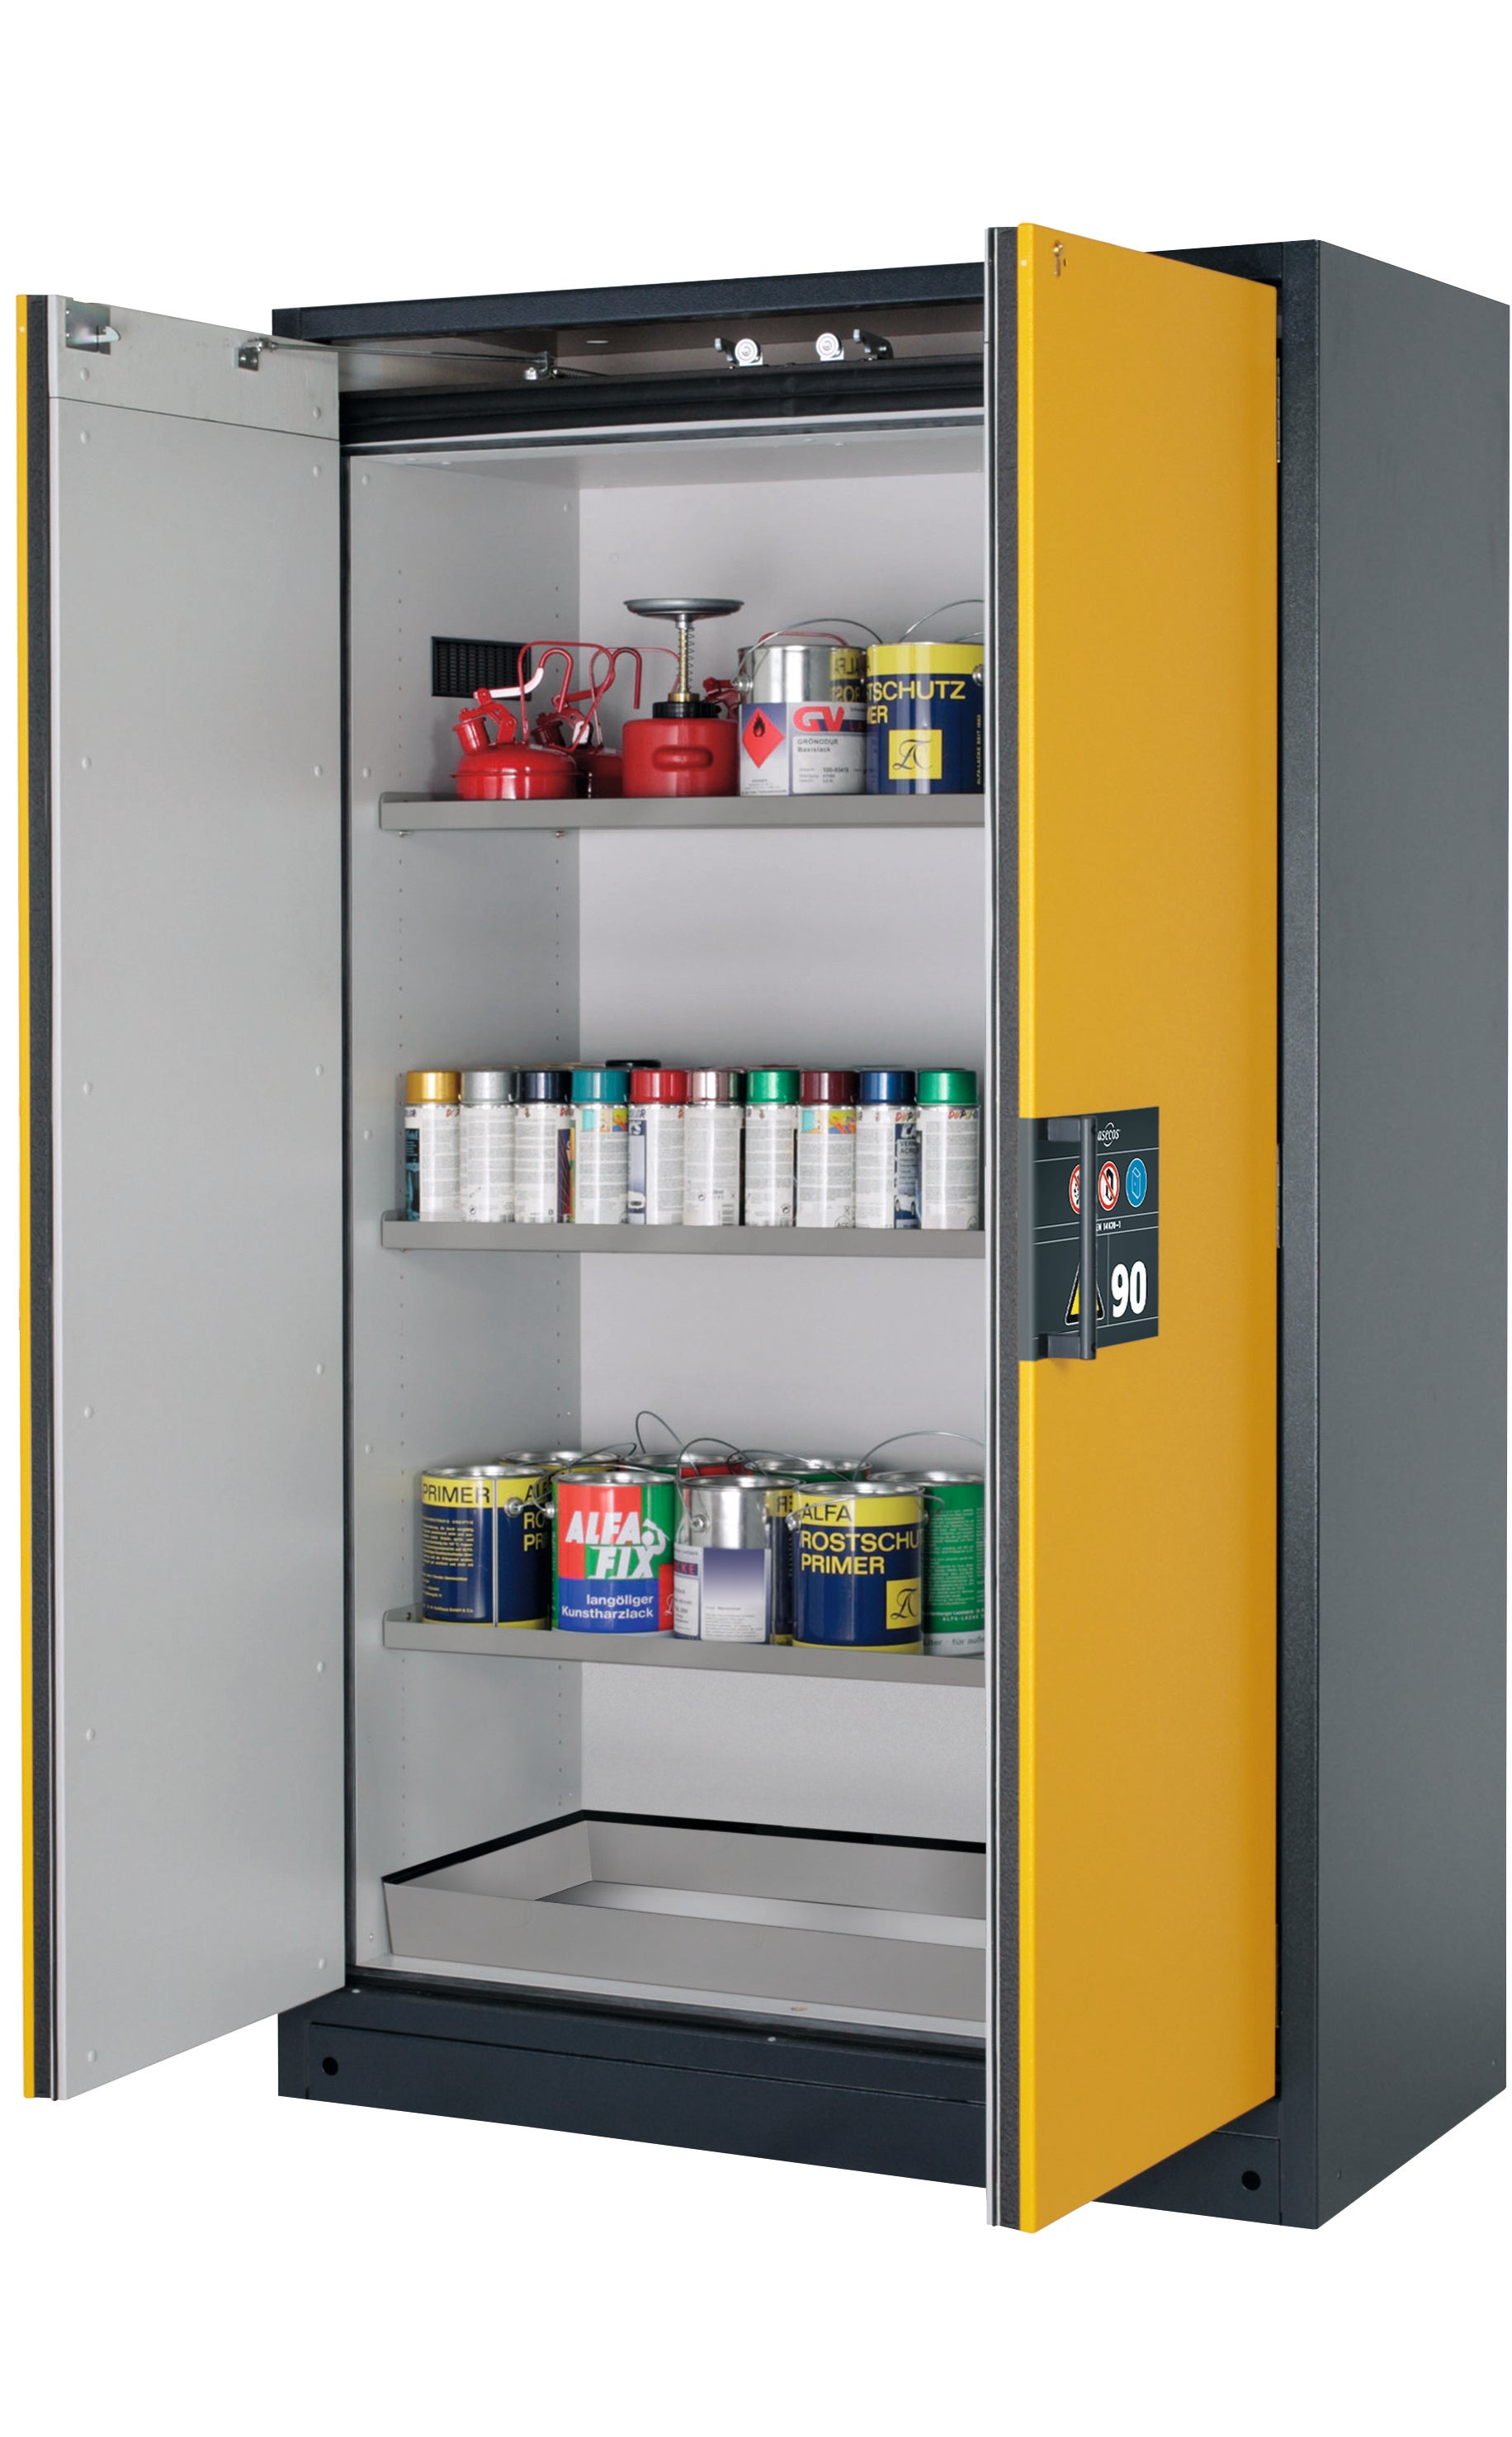 Type 90 safety storage cabinet Q-CLASSIC-90 model Q90.195.120 in warning yellow RAL 1004 with 3x shelf standard (stainless steel 1.4301),